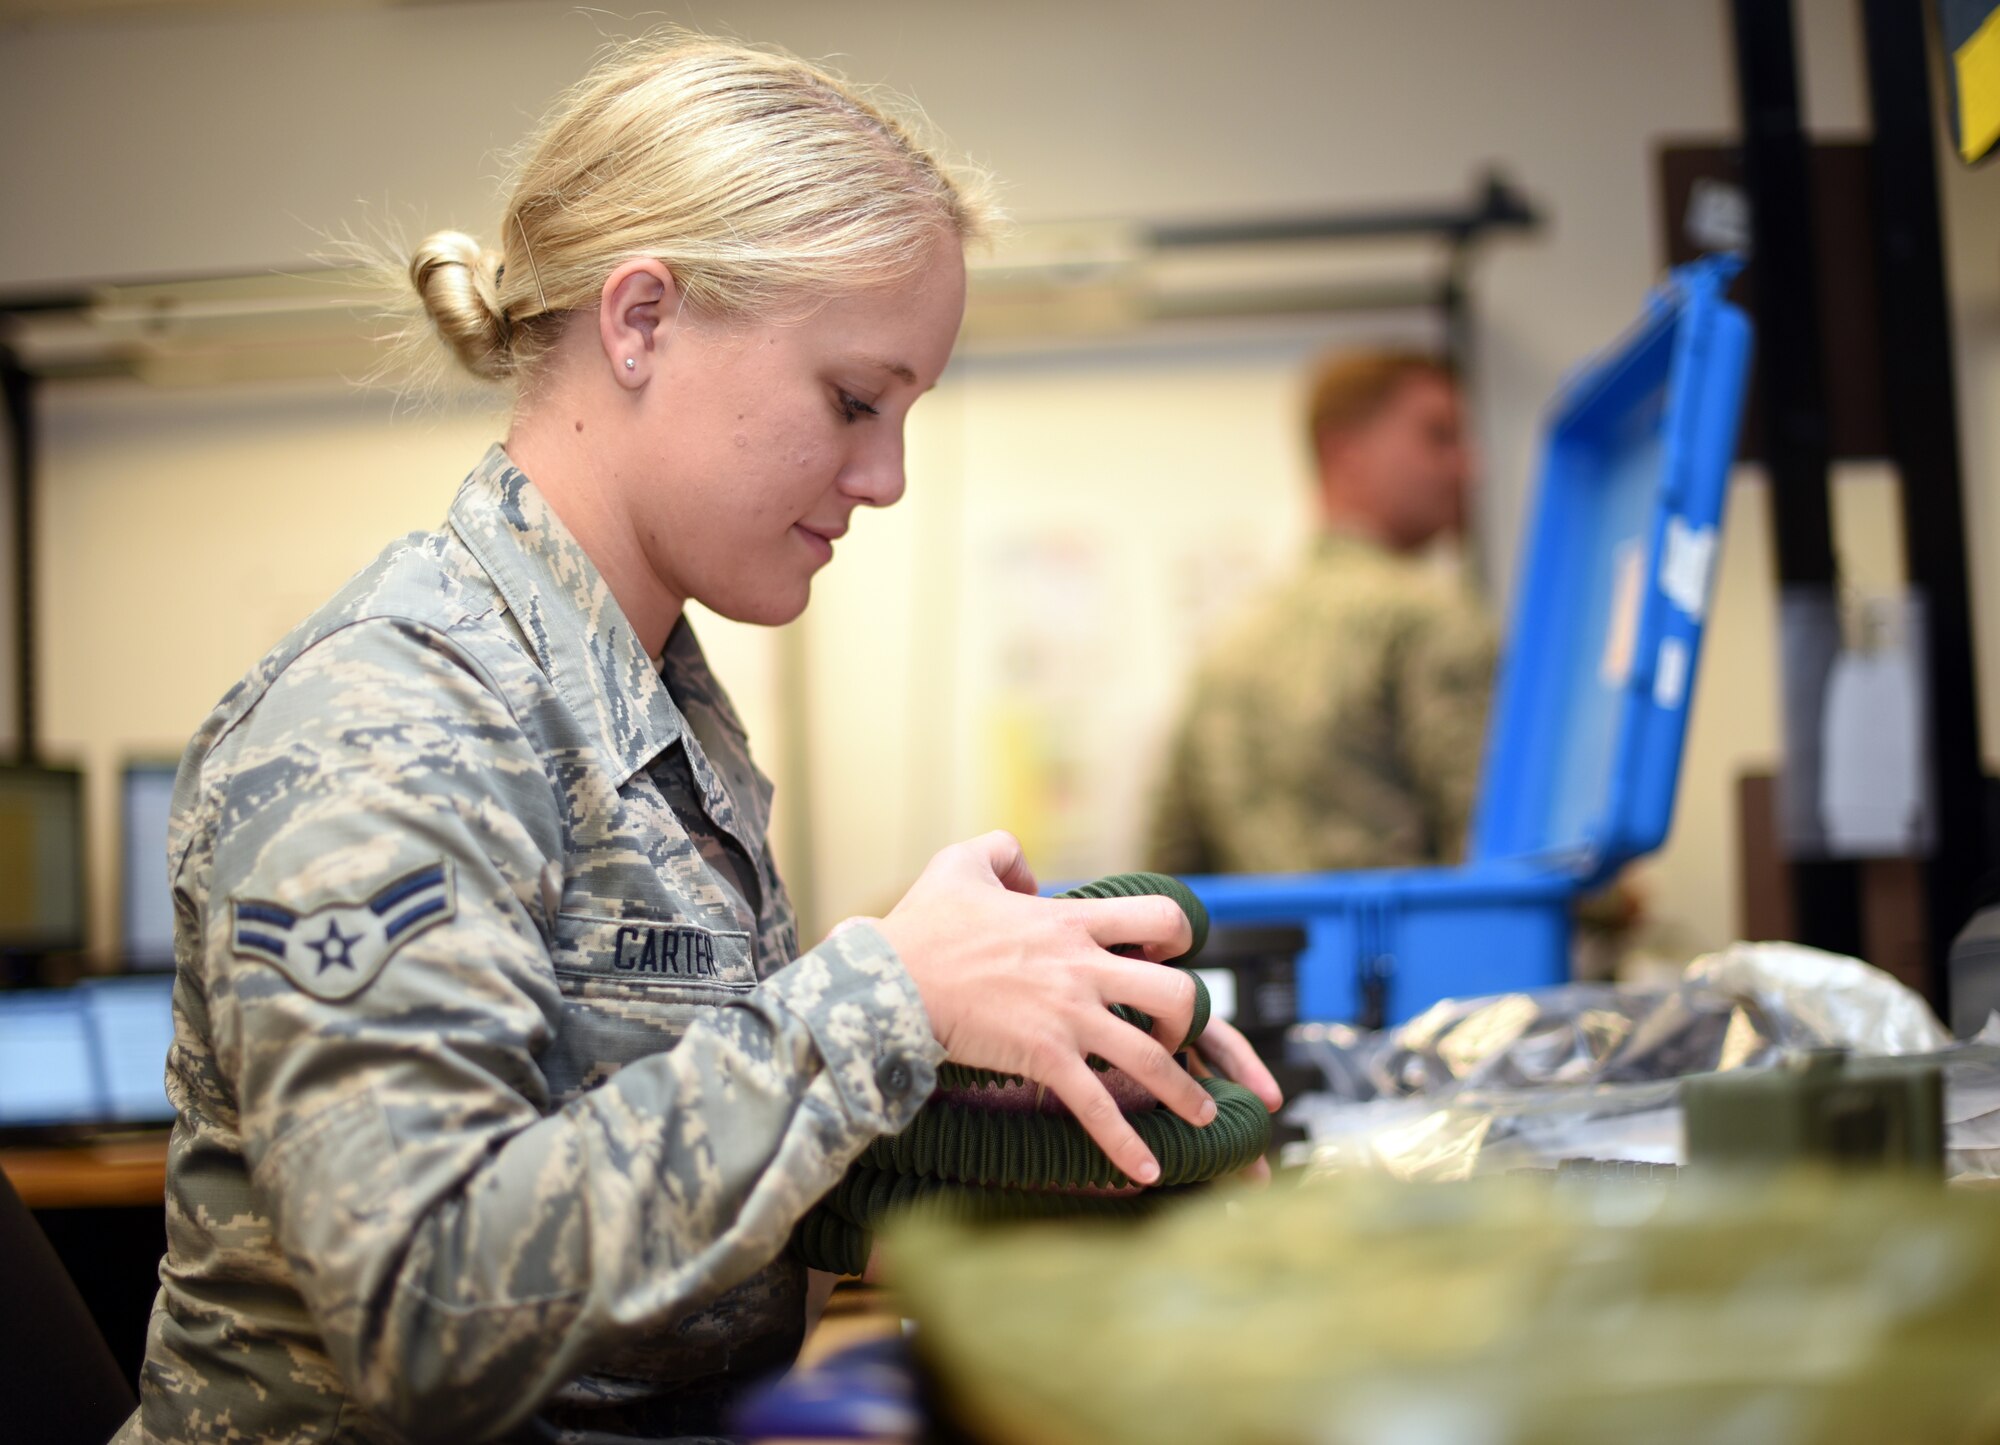 U.S. Air Force Airman 1st Class Hailey Carter, 60th Operations Support Squadron Aircrew Flight Equipment technician, inspects aircrew equipment July 9, 2019, at Travis Air Force Base, California. Travis’ AFE flight works to keep aircrew flight equipment in good working condition thereby safeguarding aircrew personnel in the event of dangerous situations. (U.S. Air Force photo by Senior Airman Christian Conrad)